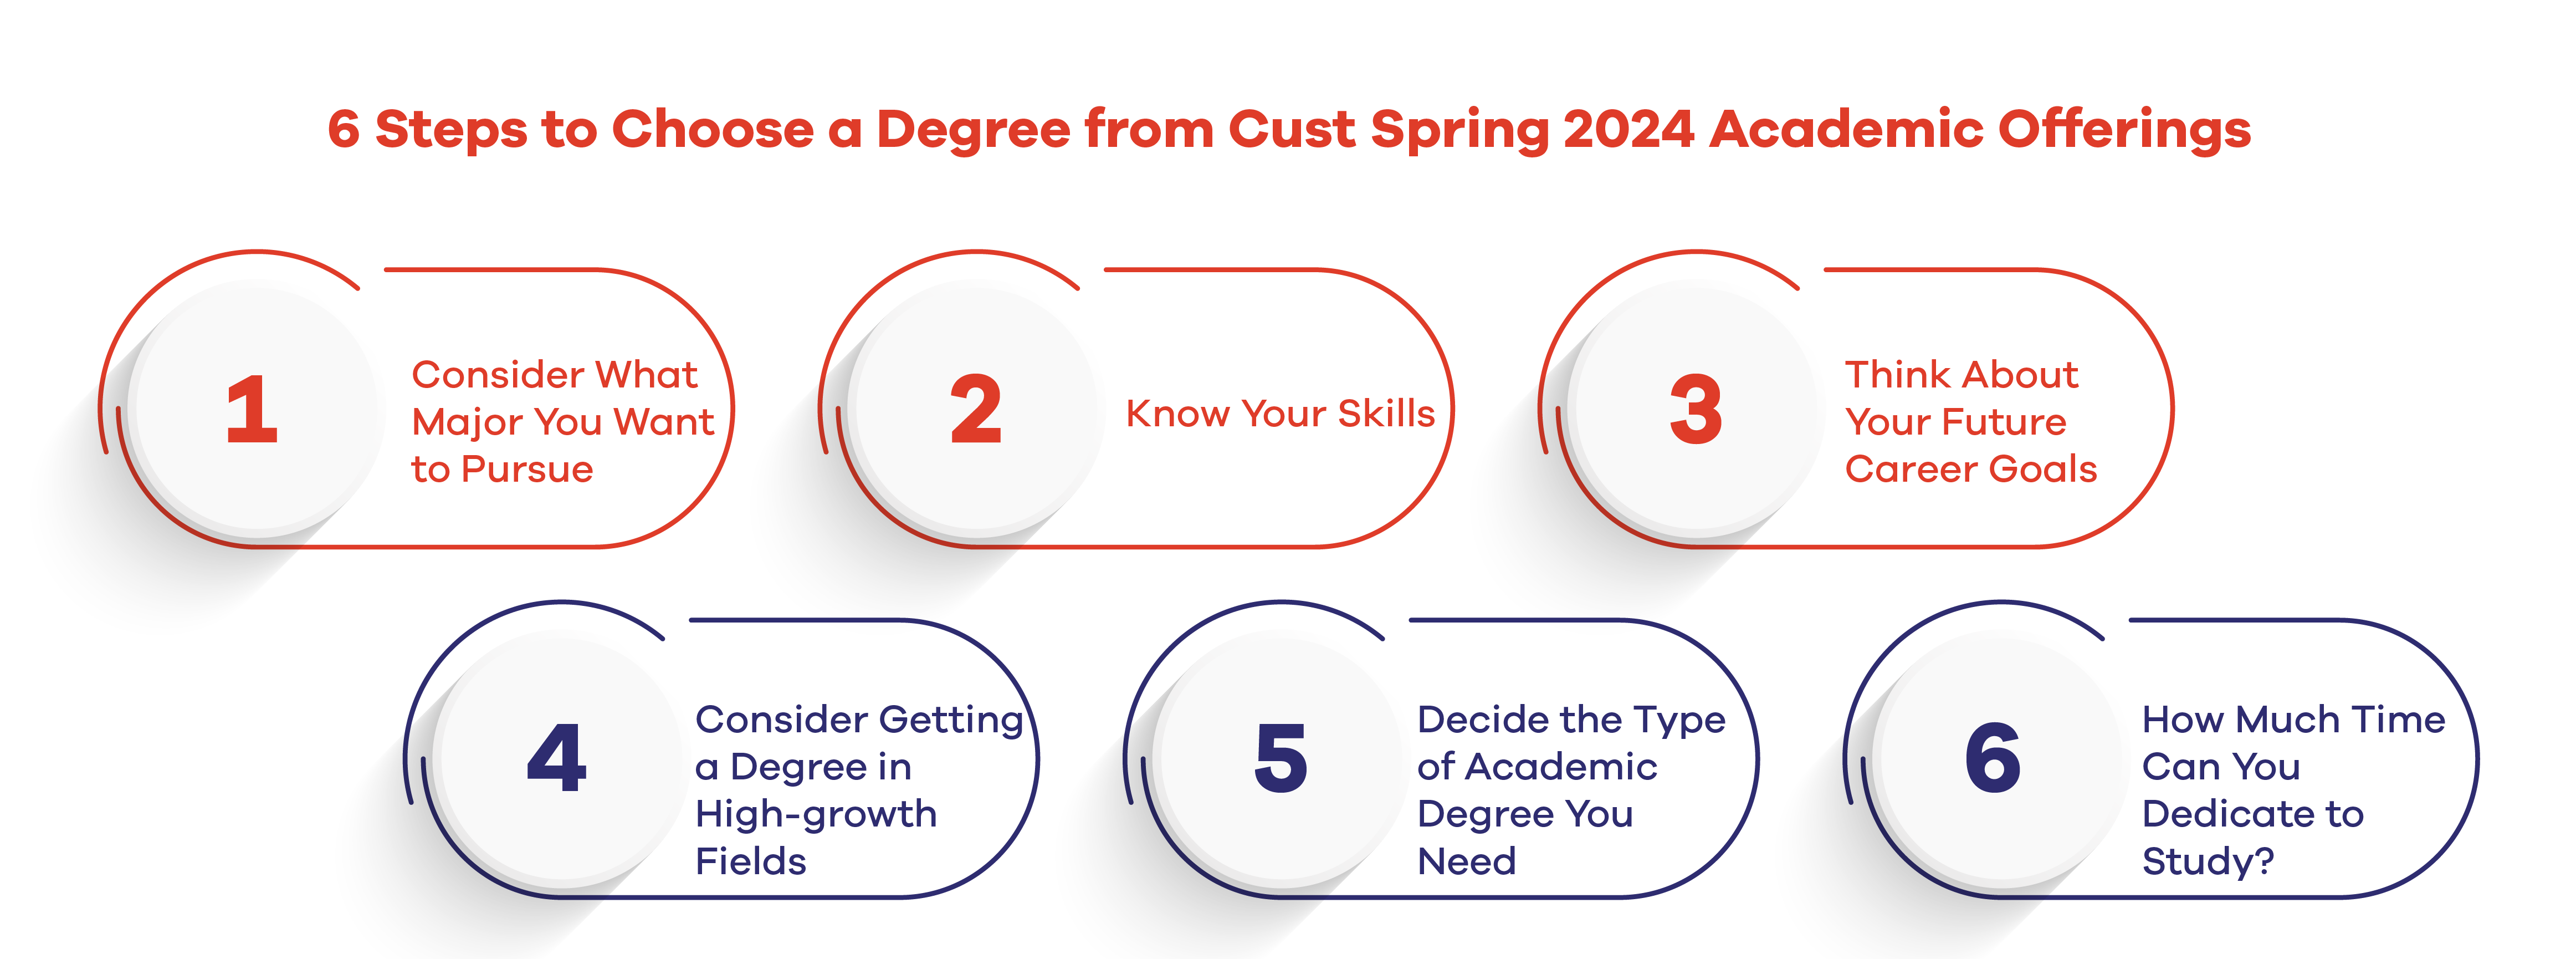 6 Steps to Choose a Degree from Cust Spring 2024 Academic Offerings 